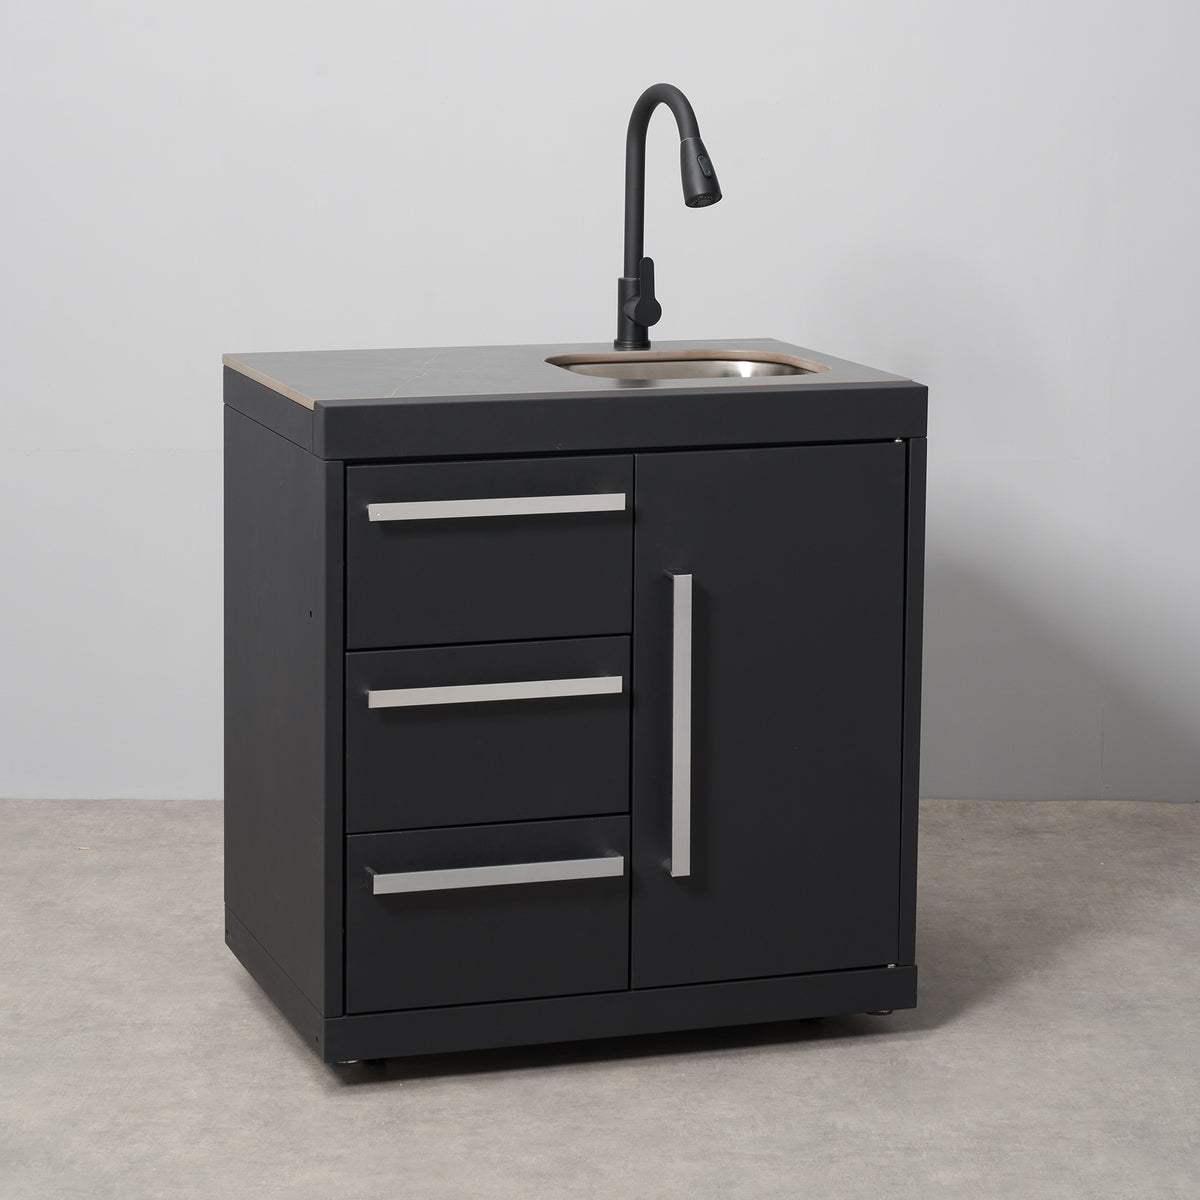 Draco Grills Fusion Outdoor Kitchen Black Sink and 3 Drawer Cabinet with Sintered Stone Top